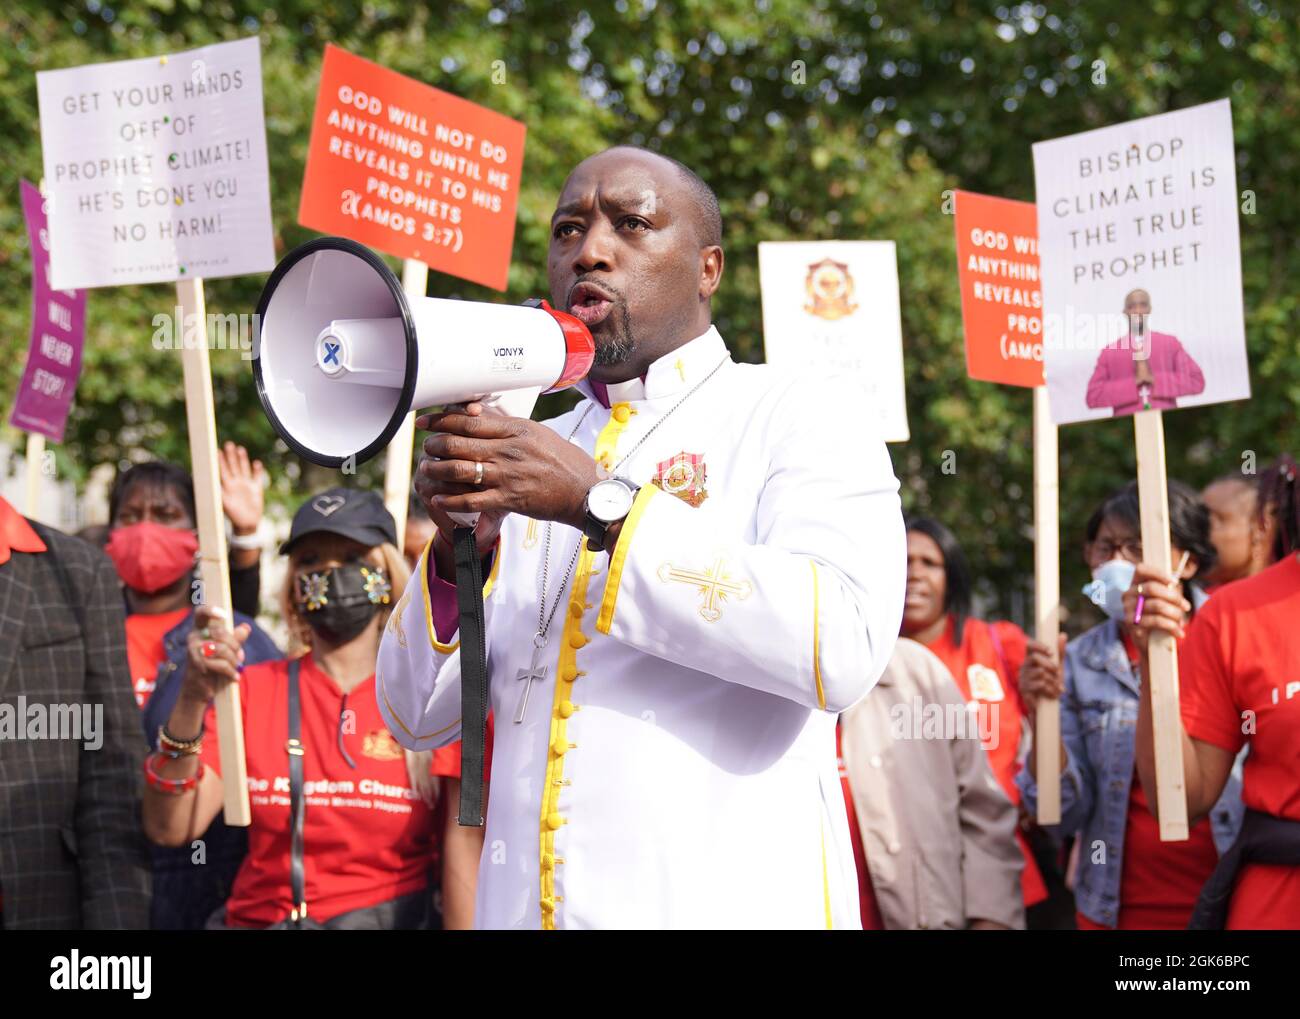 Bishop Climate Wiseman, 46, speaks to his supporters outside Inner London Crown Court, where he is charged with fraud and unfair trading offences over the selling of 'plague protection kits' with claims a mixture made from oil and red string, was a cure for Covid-19. Picture date: Monday September 13, 2021. Stock Photo